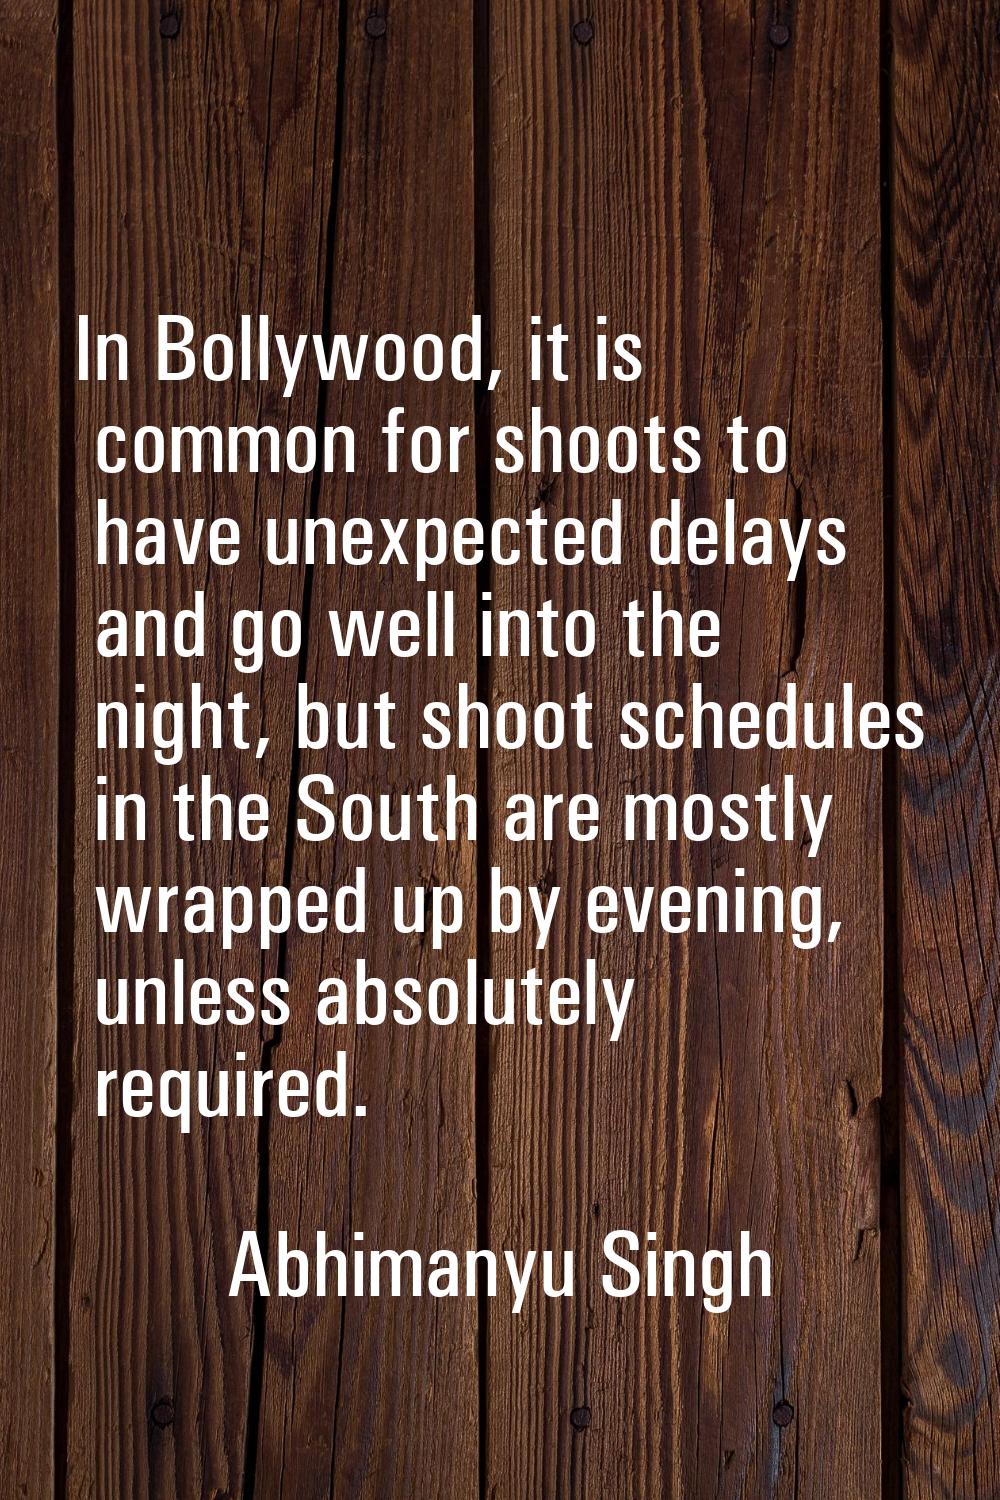 In Bollywood, it is common for shoots to have unexpected delays and go well into the night, but sho